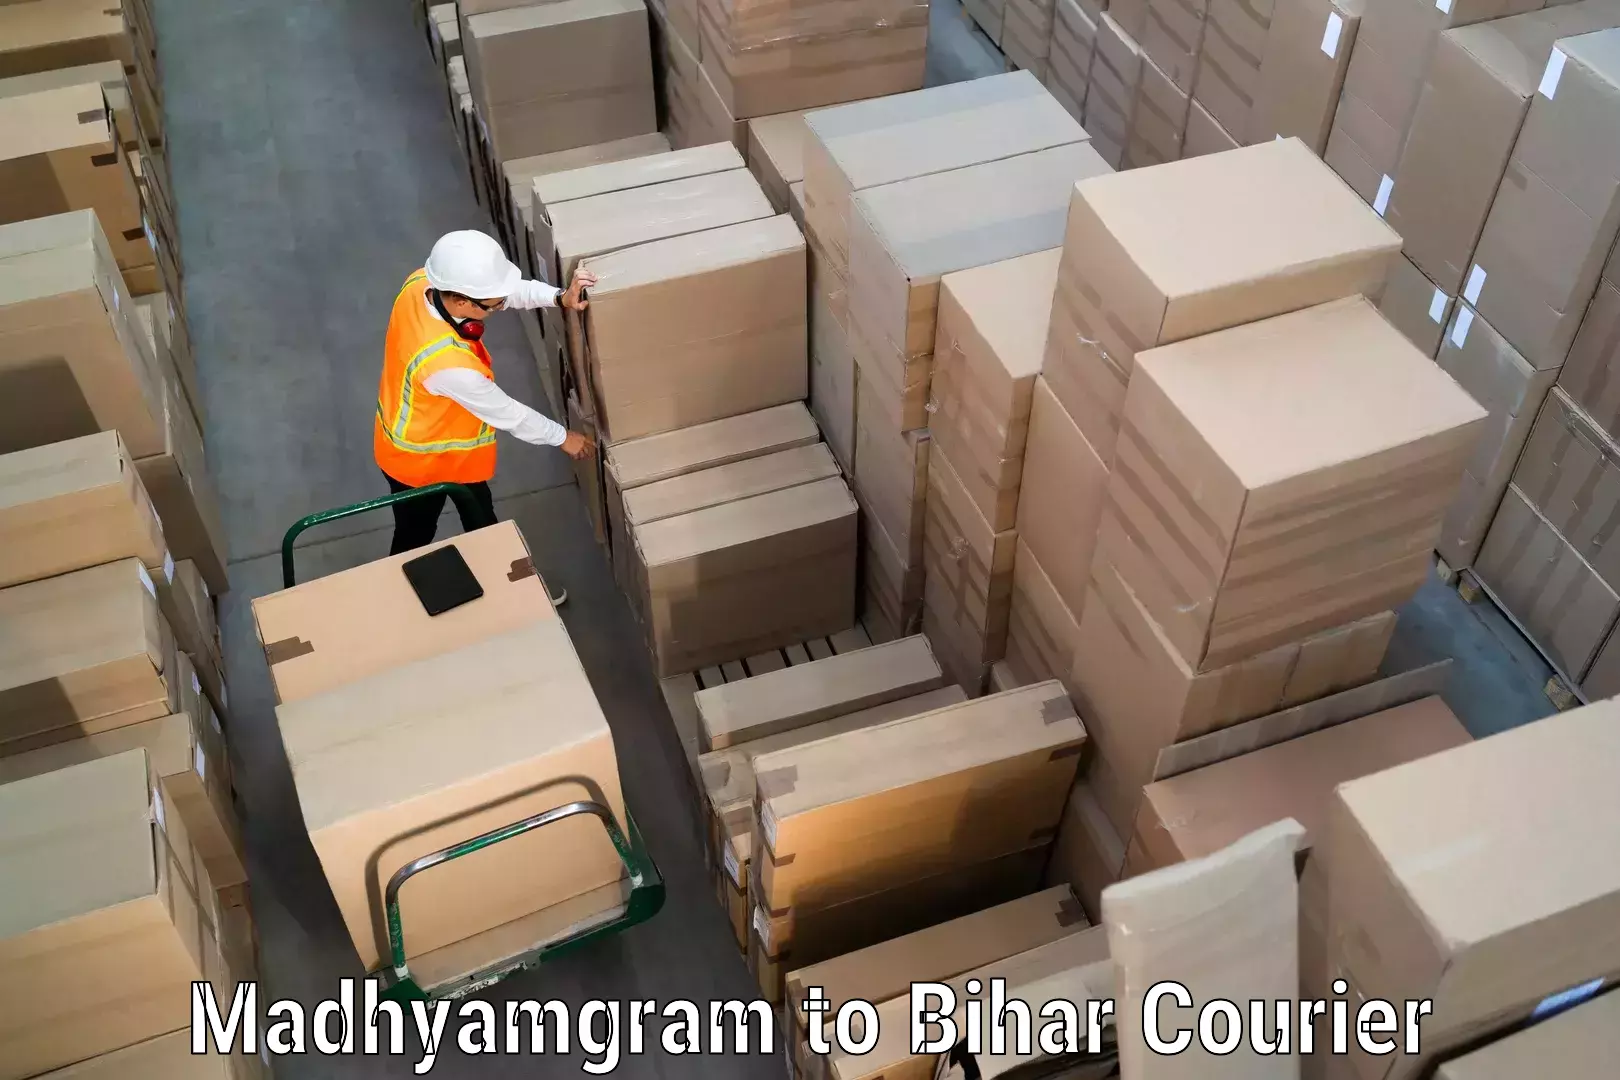 24-hour courier service Madhyamgram to Bihar